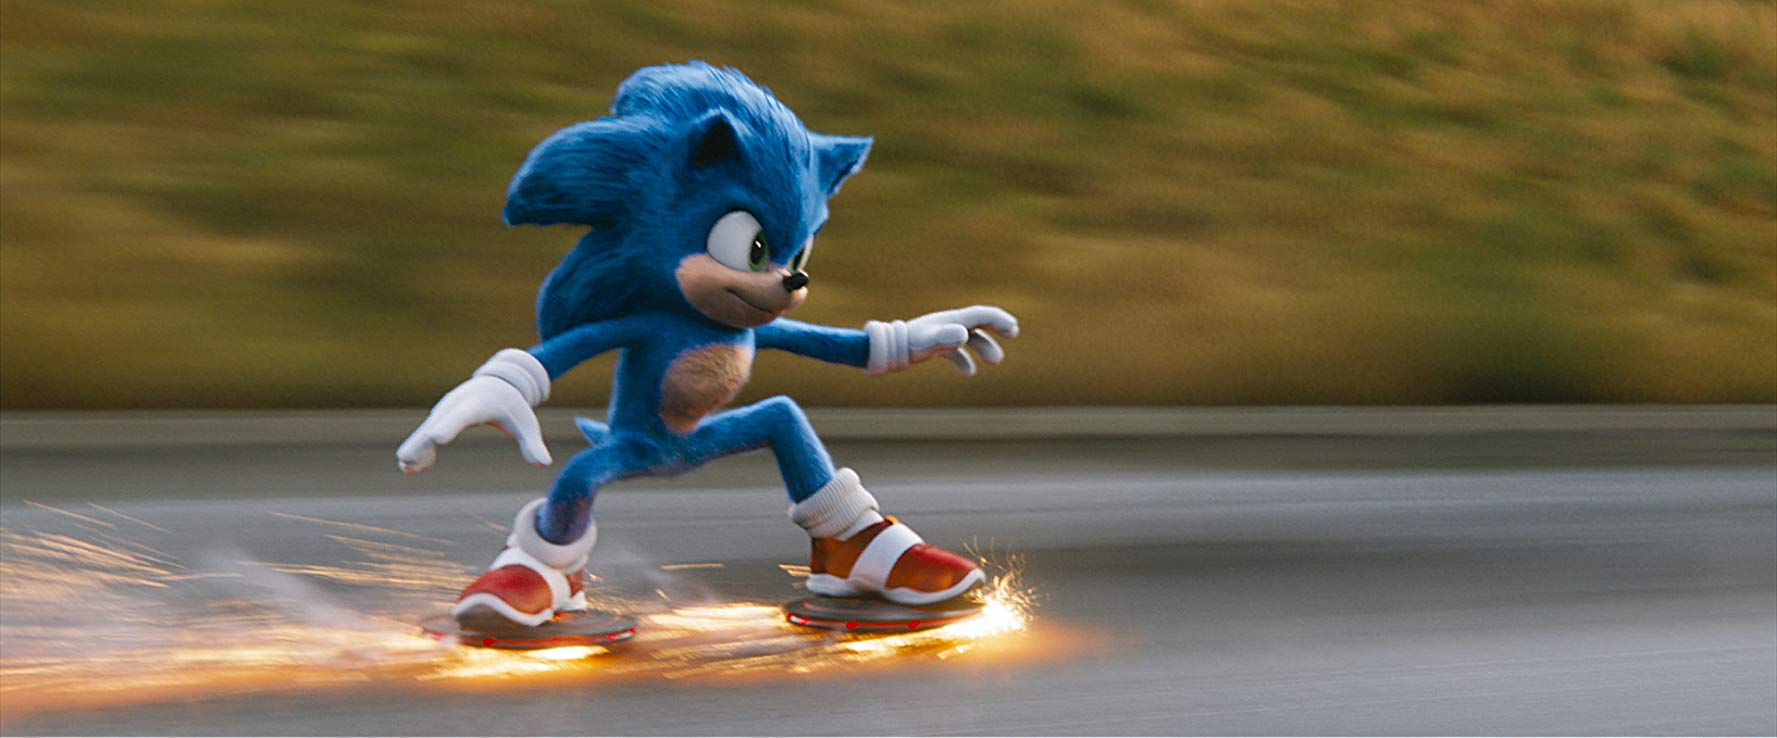 Sonic The Hedgehog is a quick fun time for the family